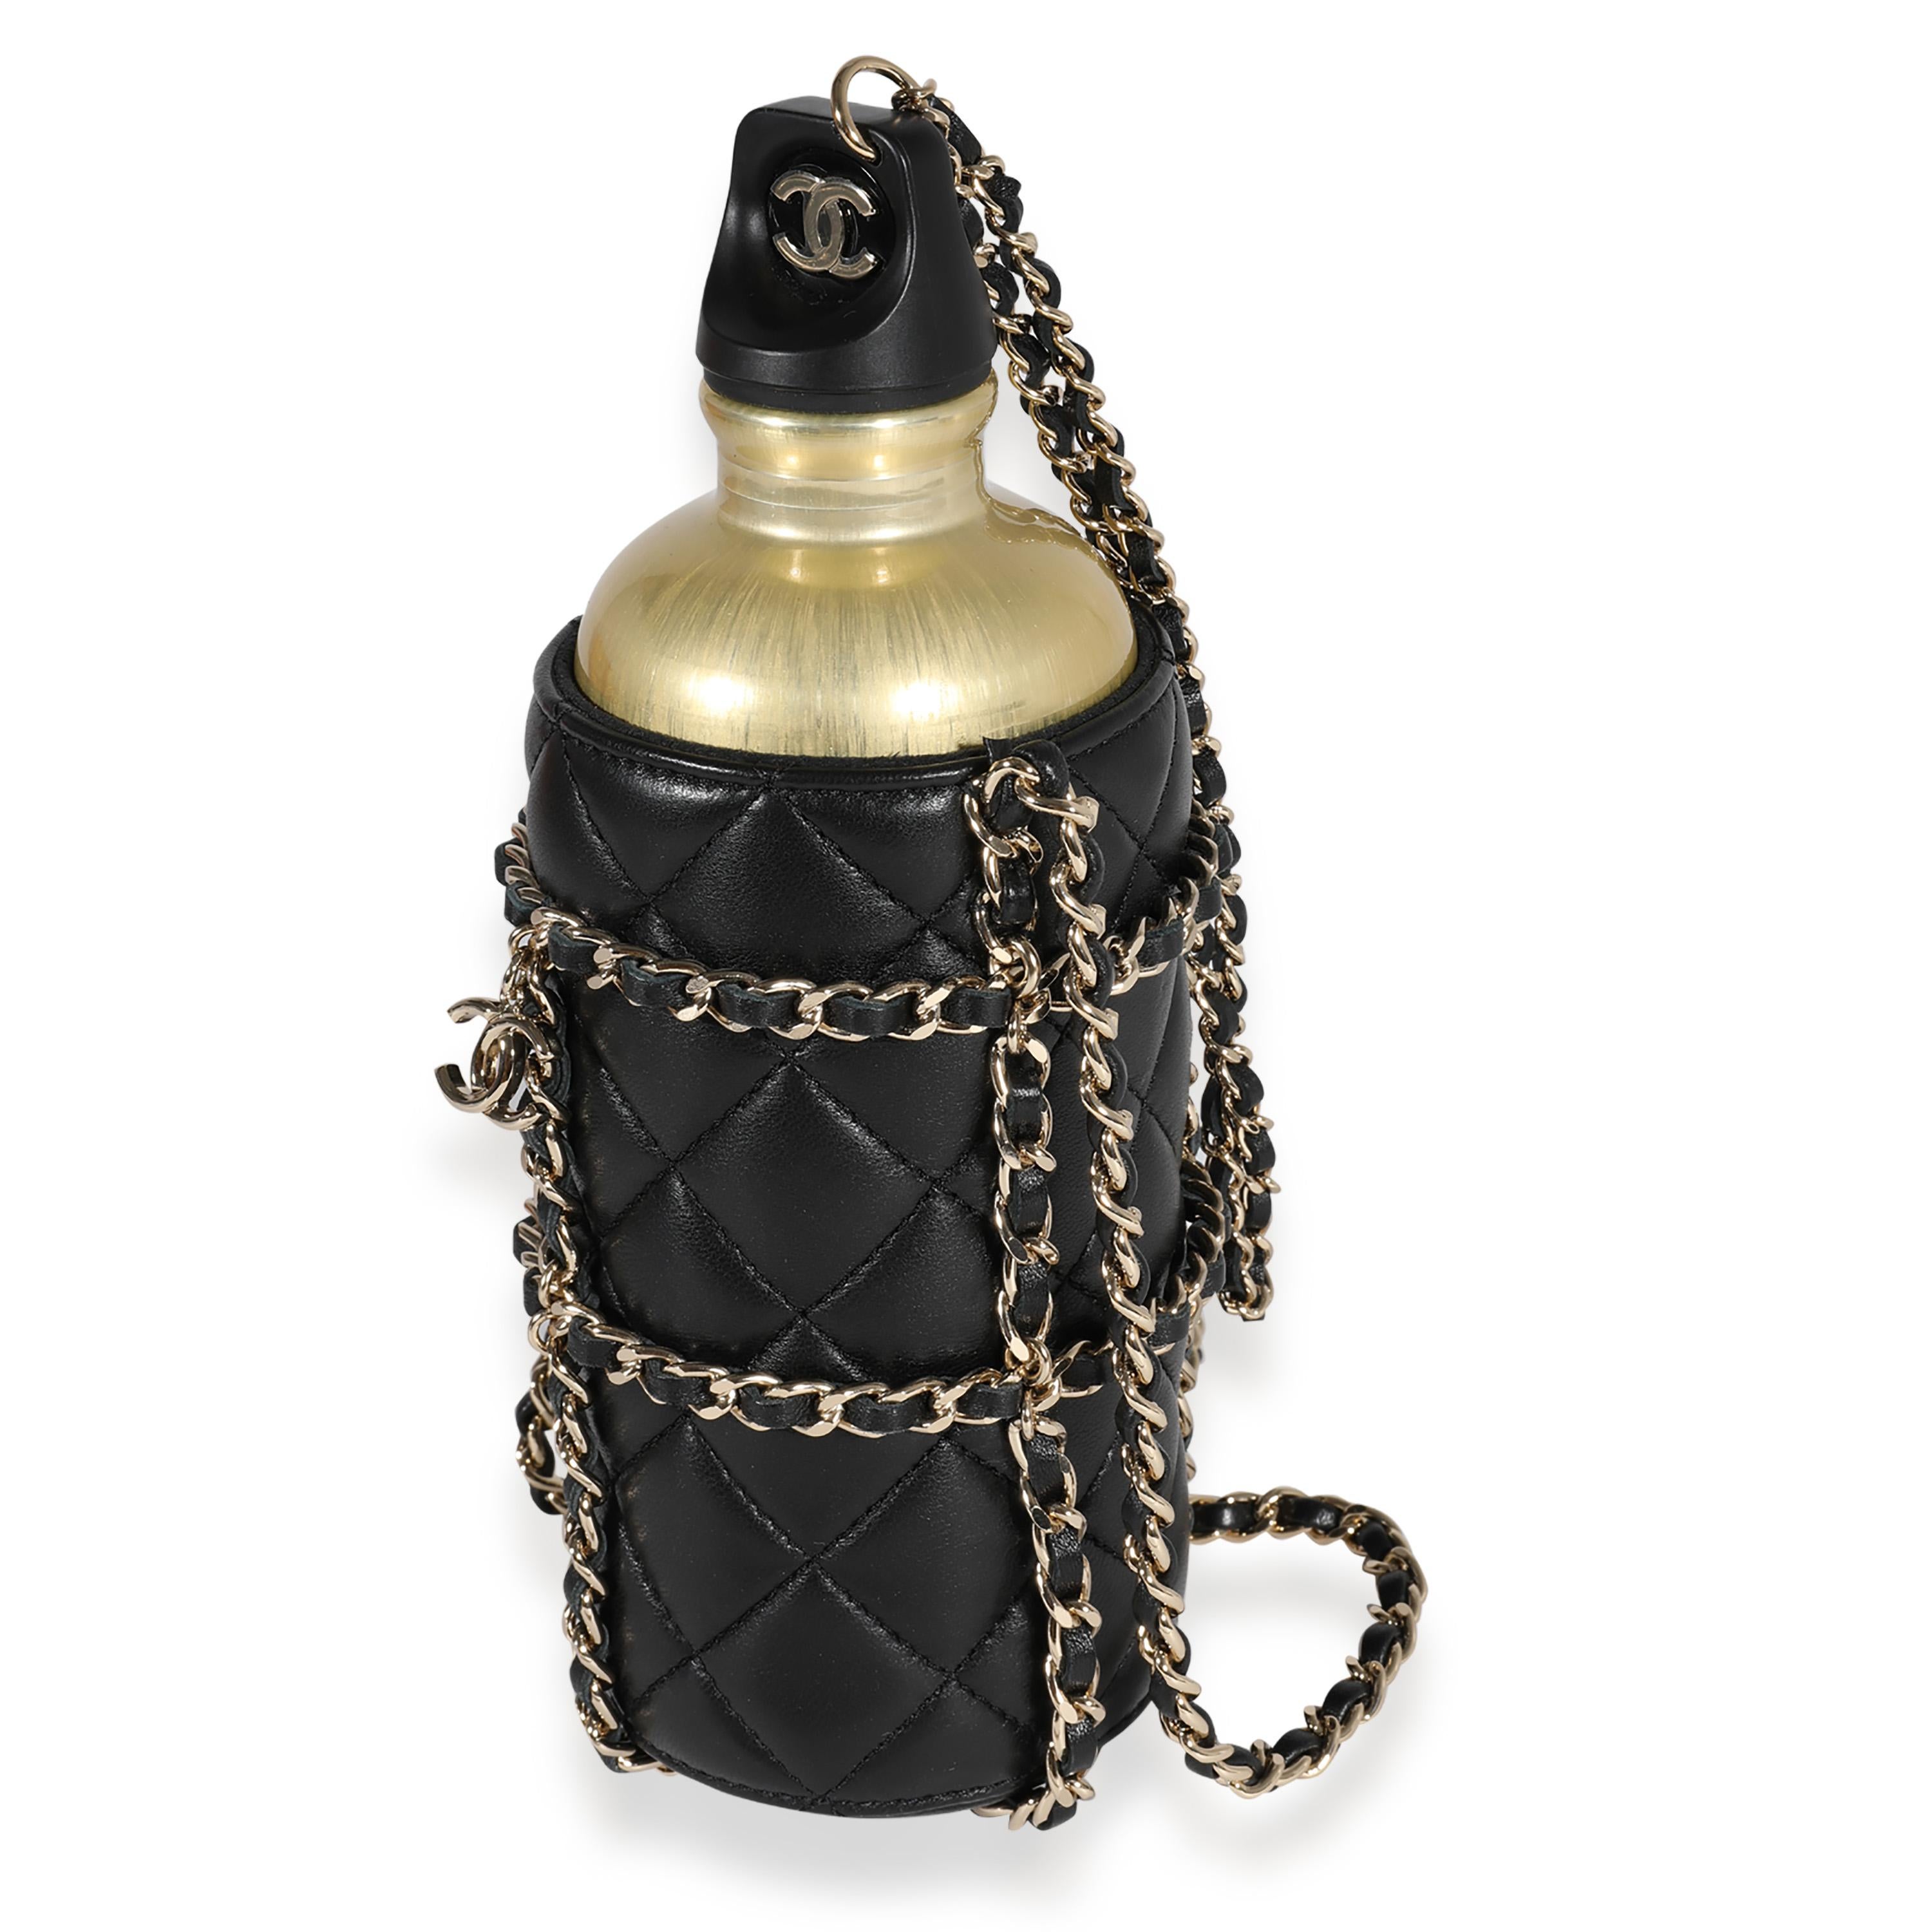 Listing Title: Chanel Gold Metal Water Bottle & Black Quilted Lambskin Holder
SKU: 122492
MSRP: 6000.00
Condition: Pre-owned 
Handbag Condition: Very Good
Condition Comments: Very Good Condition. Light scuffing at exterior. Scratching at hardware.